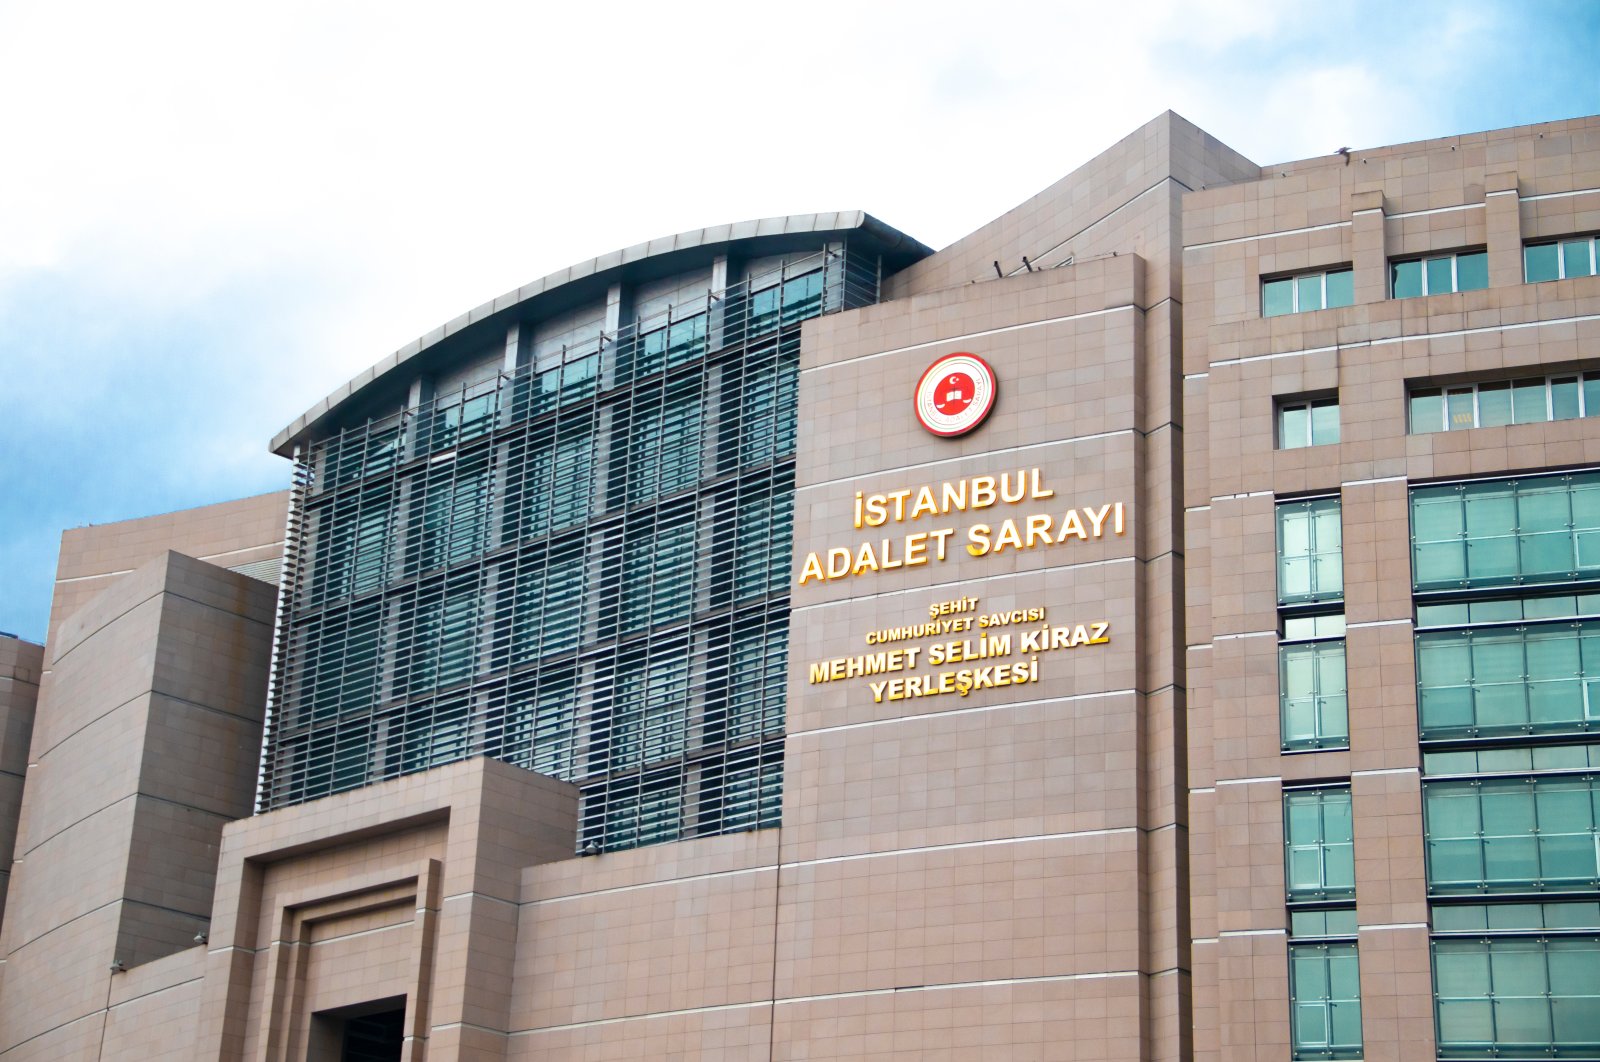 The exterior of the courthouse where the trial was held, in Istanbul, Türkiye, April 7, 2019. (Shutterstock Photo)